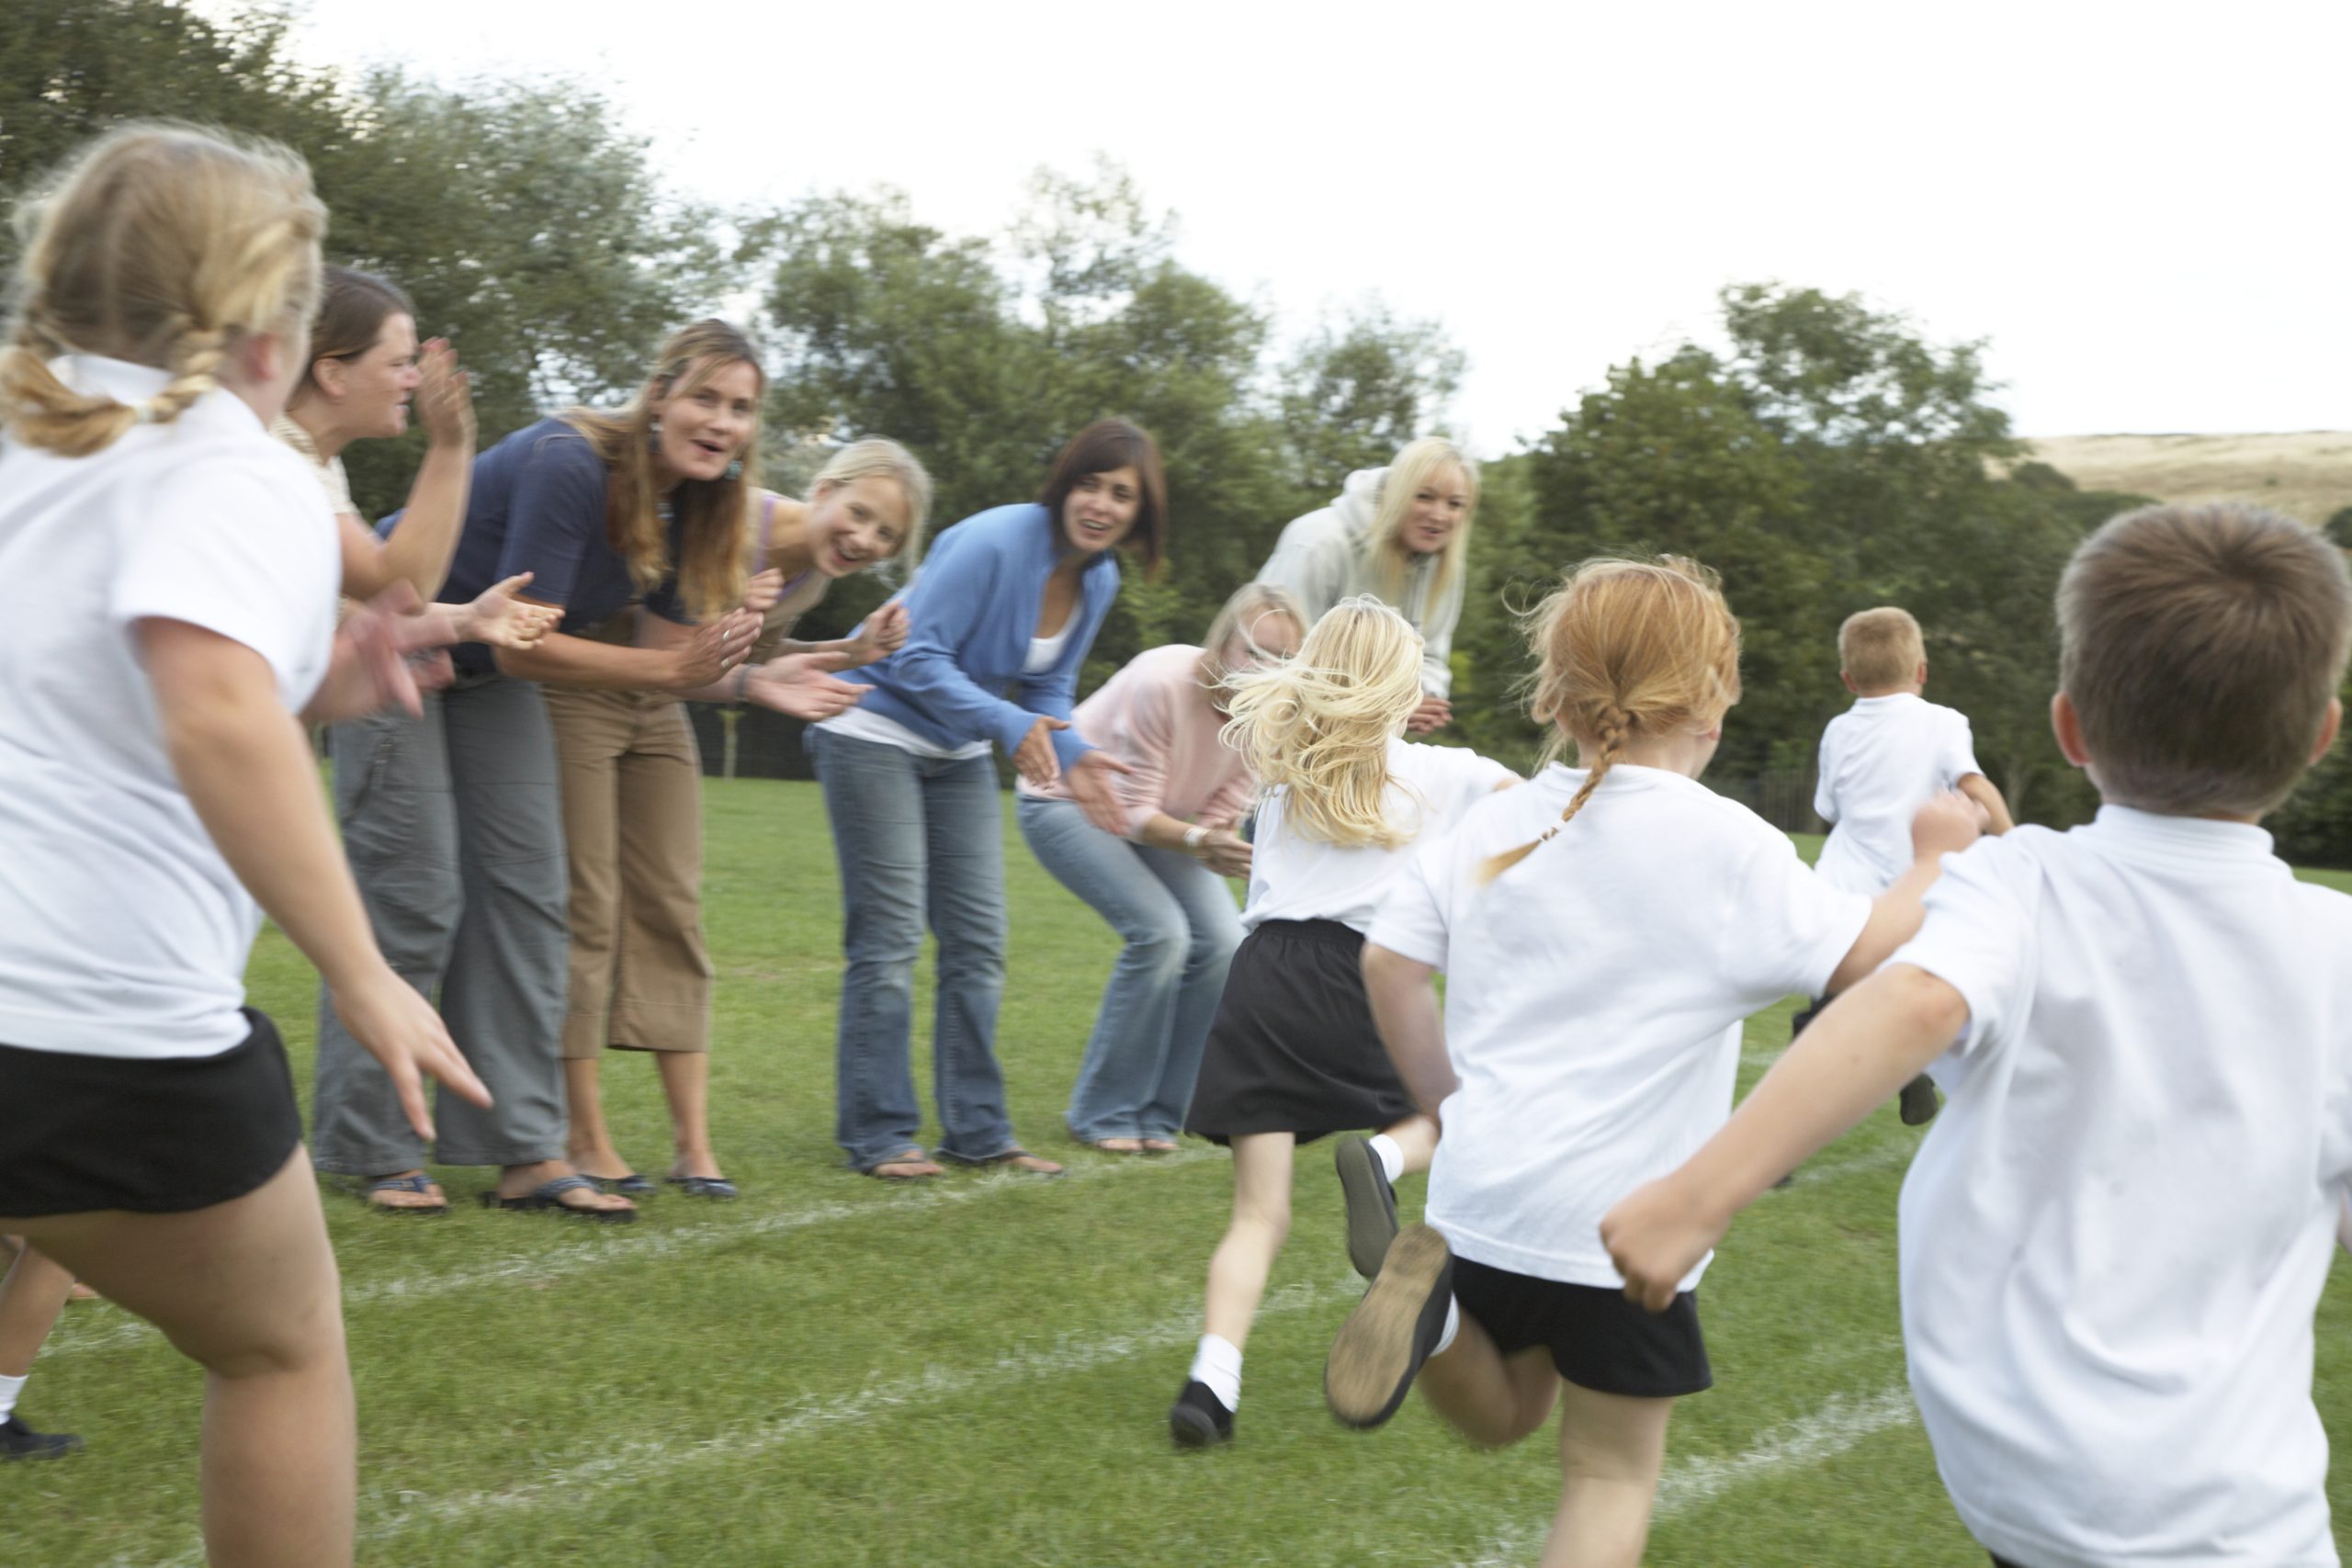 I’m judged by ‘smug’ stay-at-home mums for being late to sports day – but the whole thing’s outdated & I want it banned